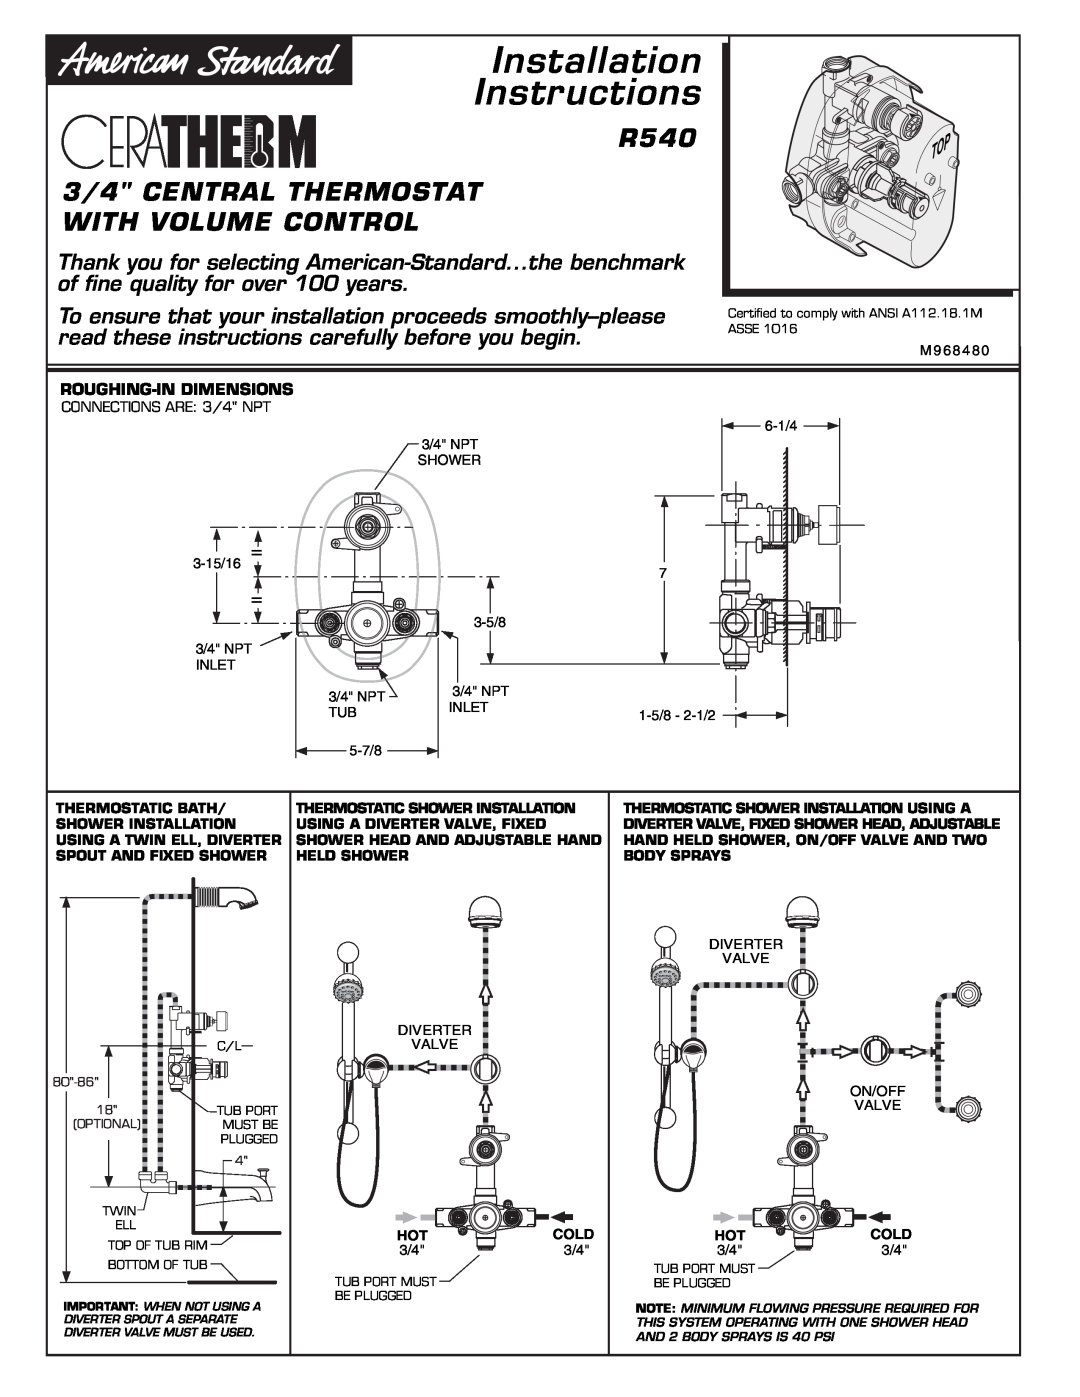 American Standard T373.741, T373.740, T373.742 R540 3/4 CENTRAL THERMOSTAT WITH VOLUME CONTROL, Installation Instructions 